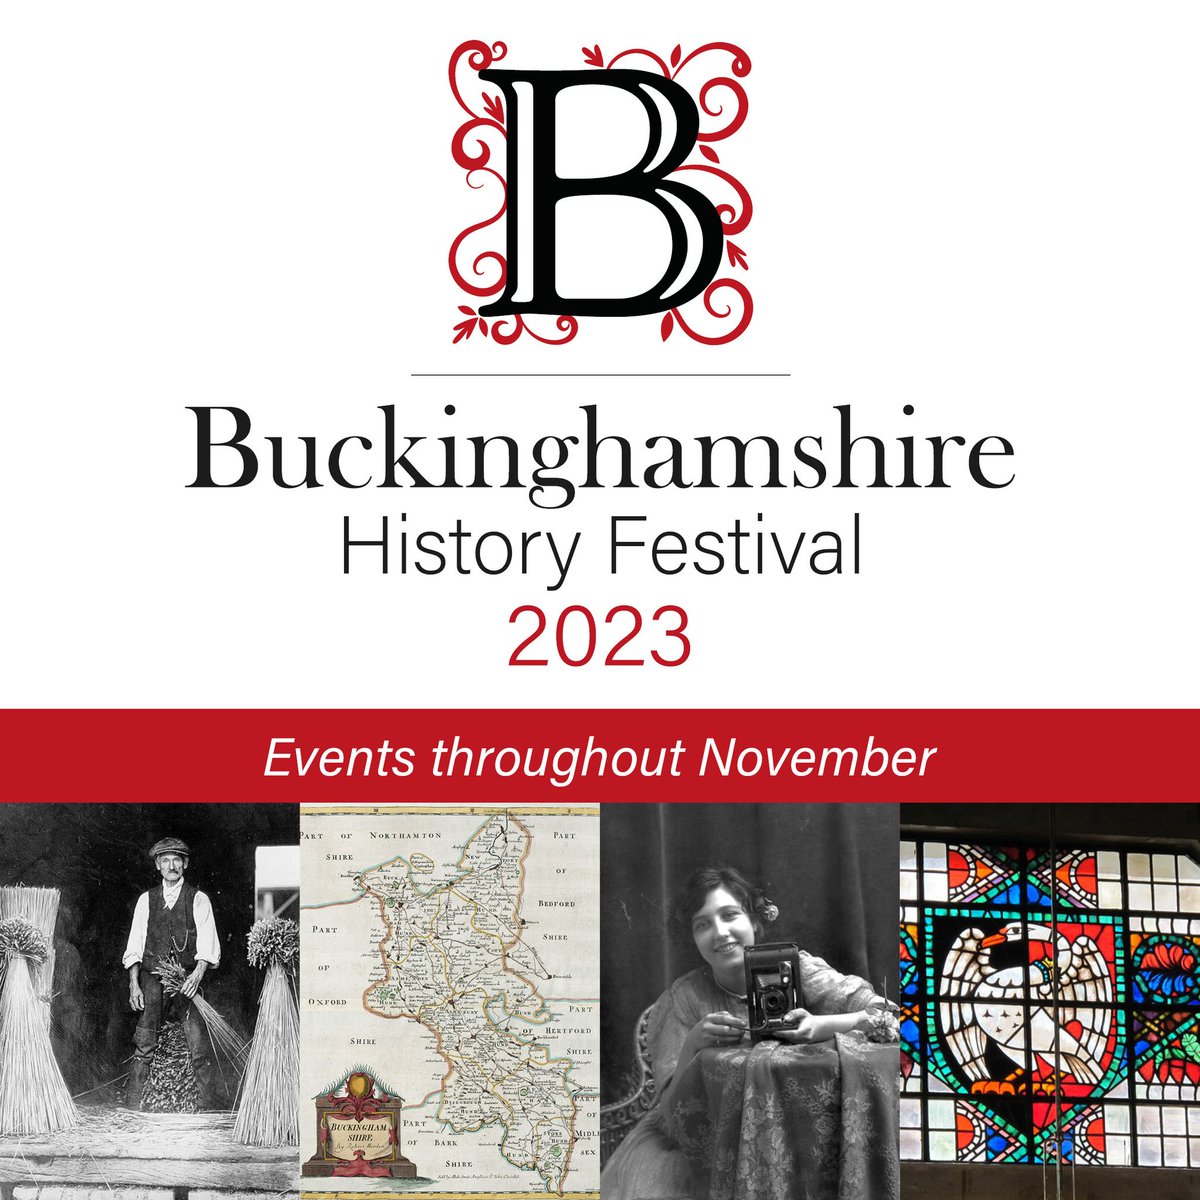 It's week four of Buckinghamshire History Festival, and we have seven brilliant events for you to enjoy! From ghost walks to awards ceremonies, lace making to windmills, there's something for everyone. Head to histfestbucks.co.uk for more information!